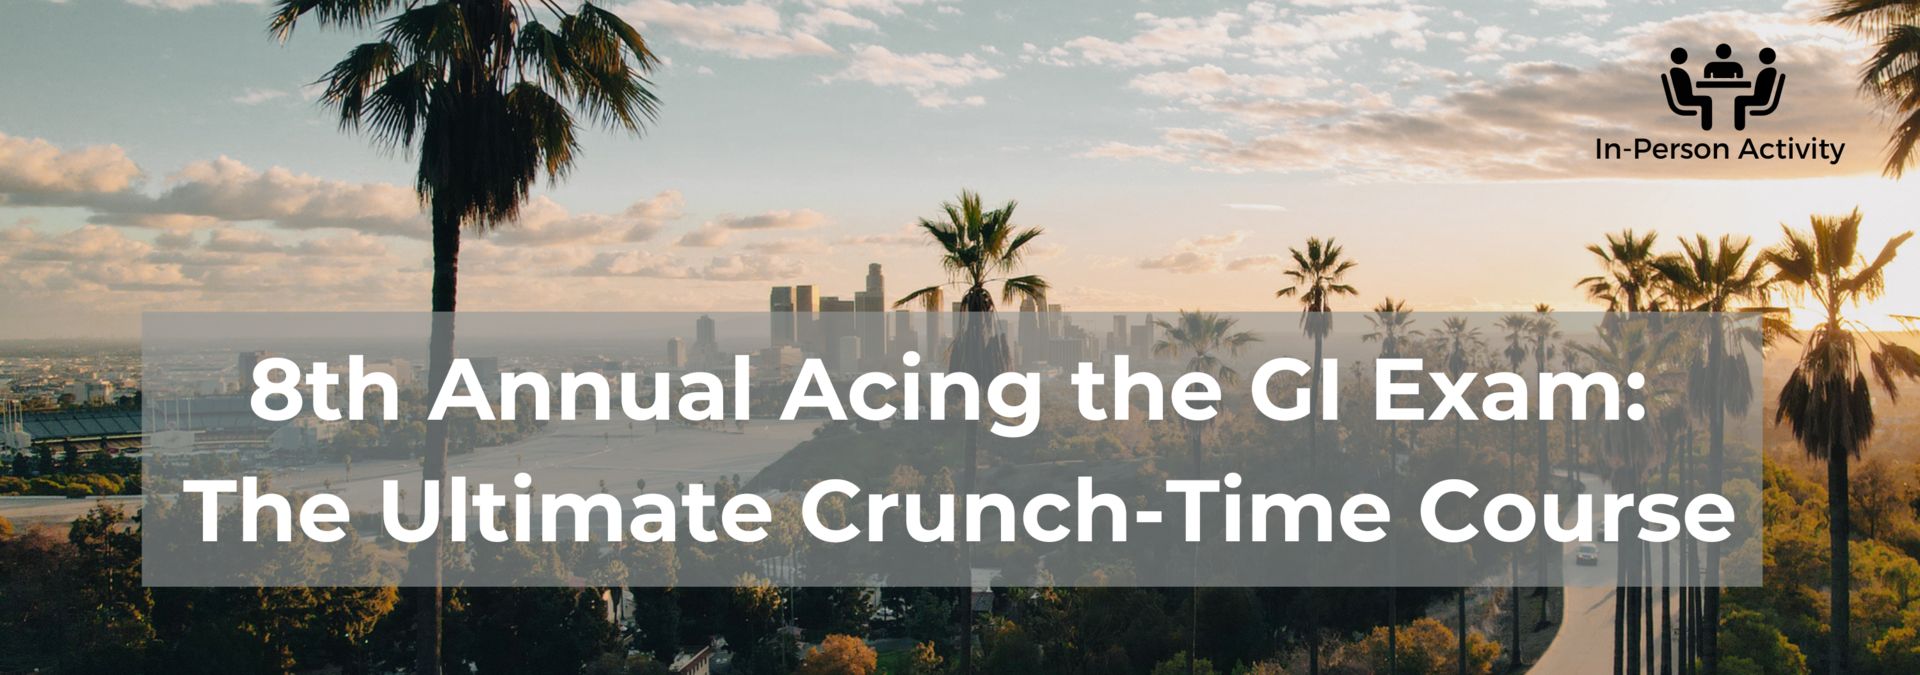 8th Annual Acing the GI Exam: The Ultimate Crunch-Time Course, Los Angeles, California, United States